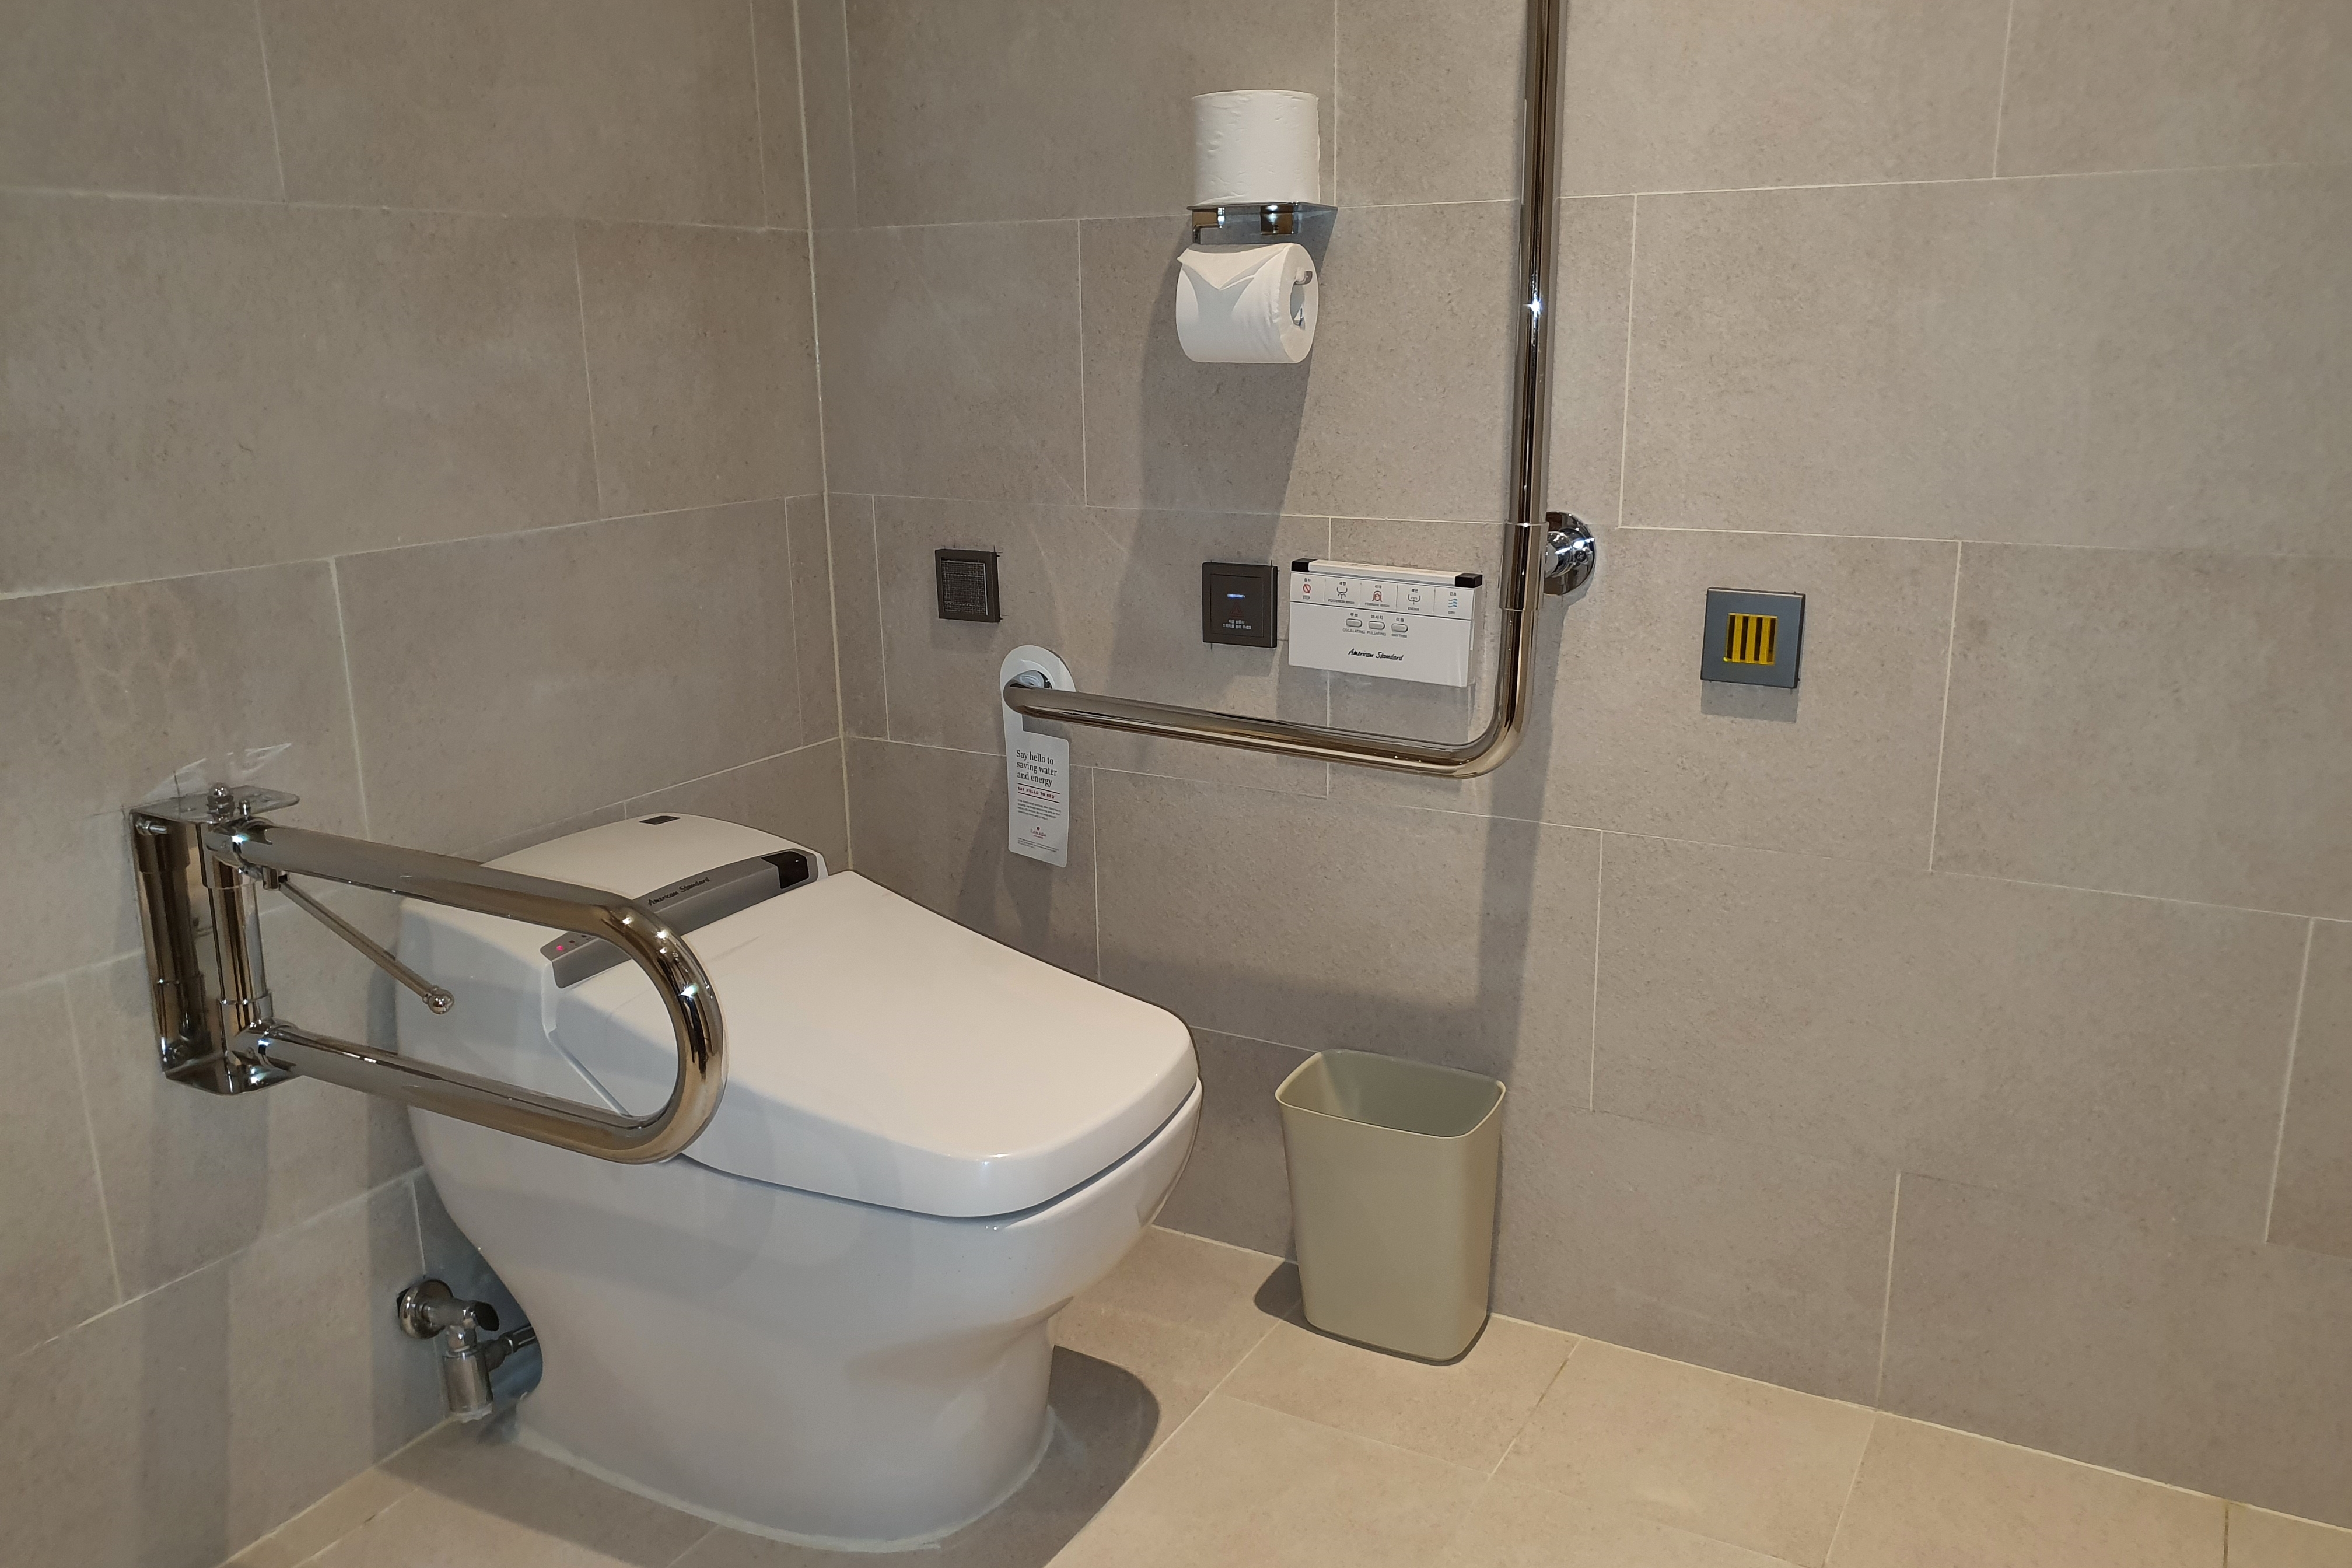 Bathroom in the guest room 0 : A toilet equipped with grab bars